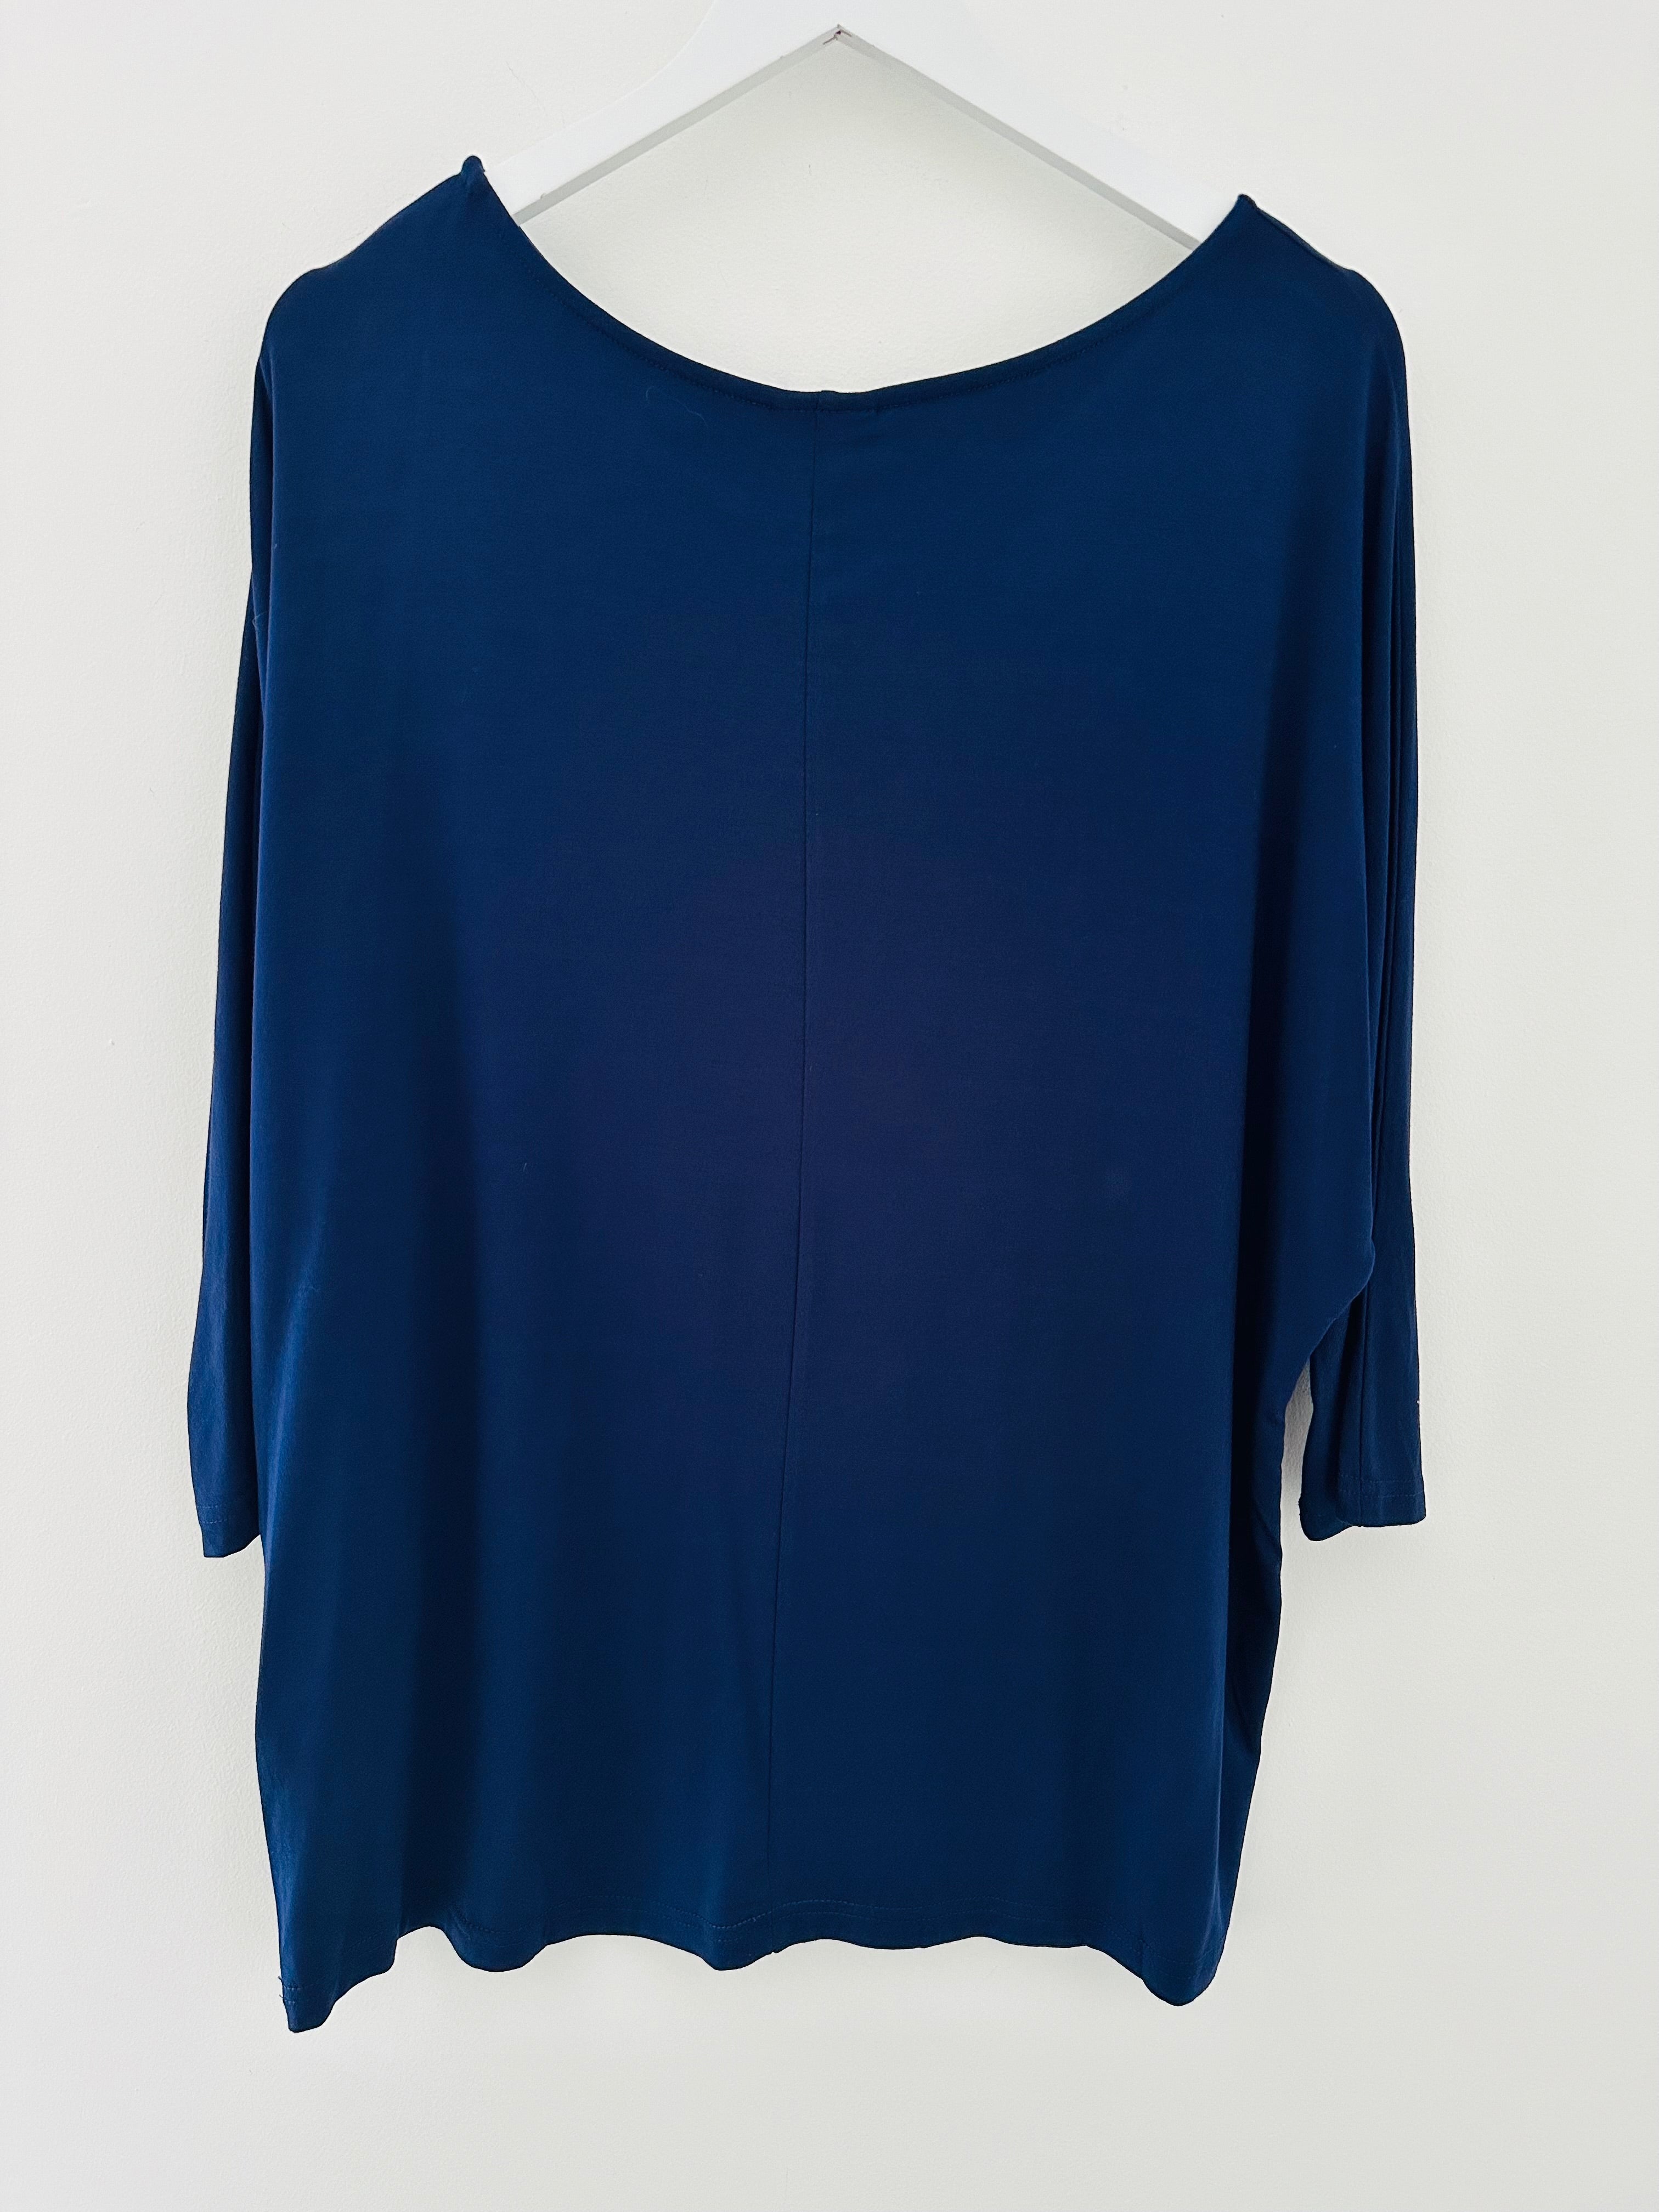 Bamboo Jersey Batwing Top in Navy